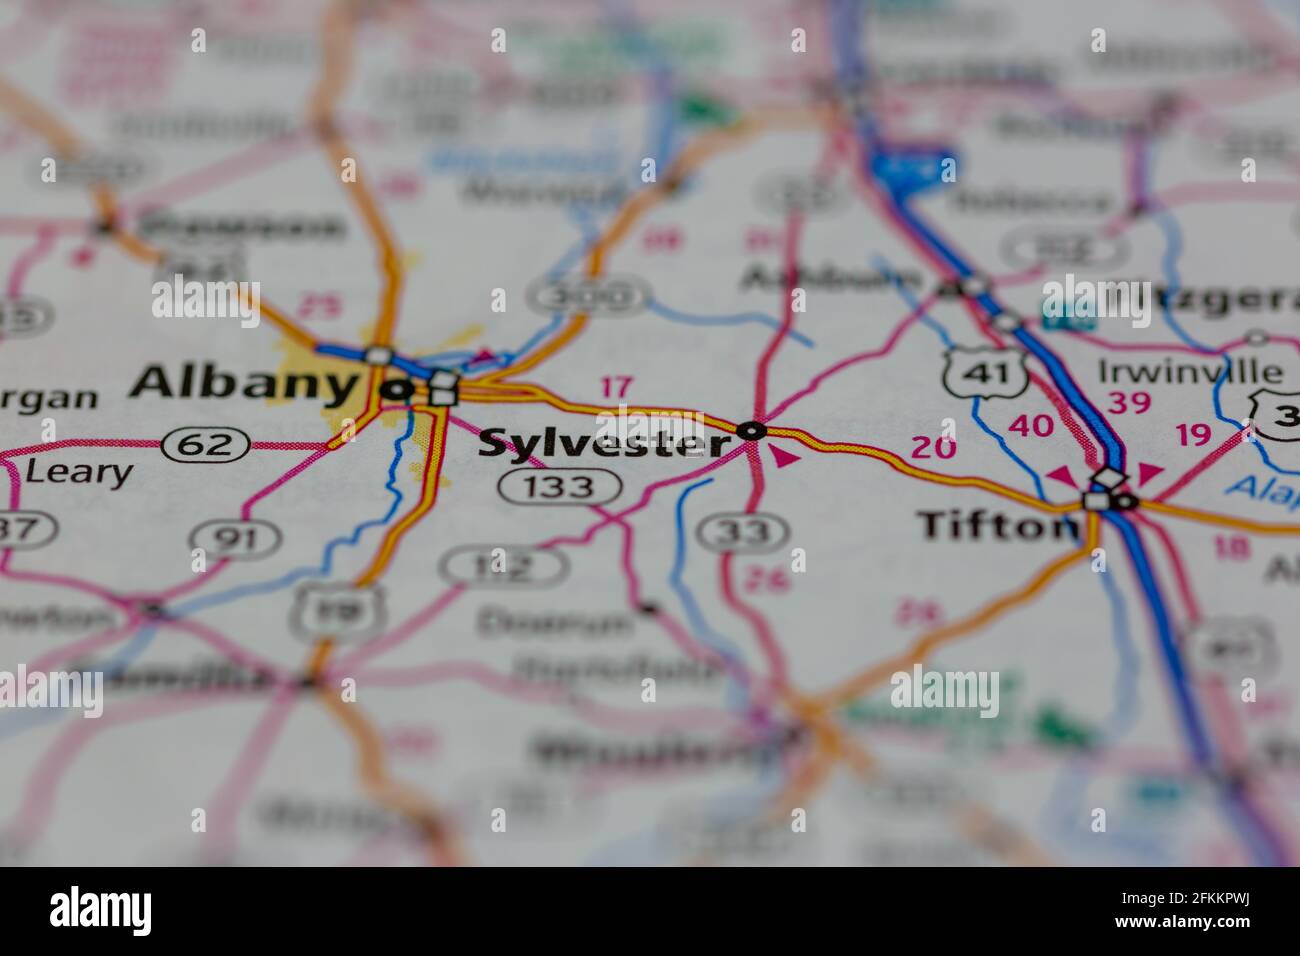 Sylvester Georgia USA Shown on a Geography map or road map Stock Photo